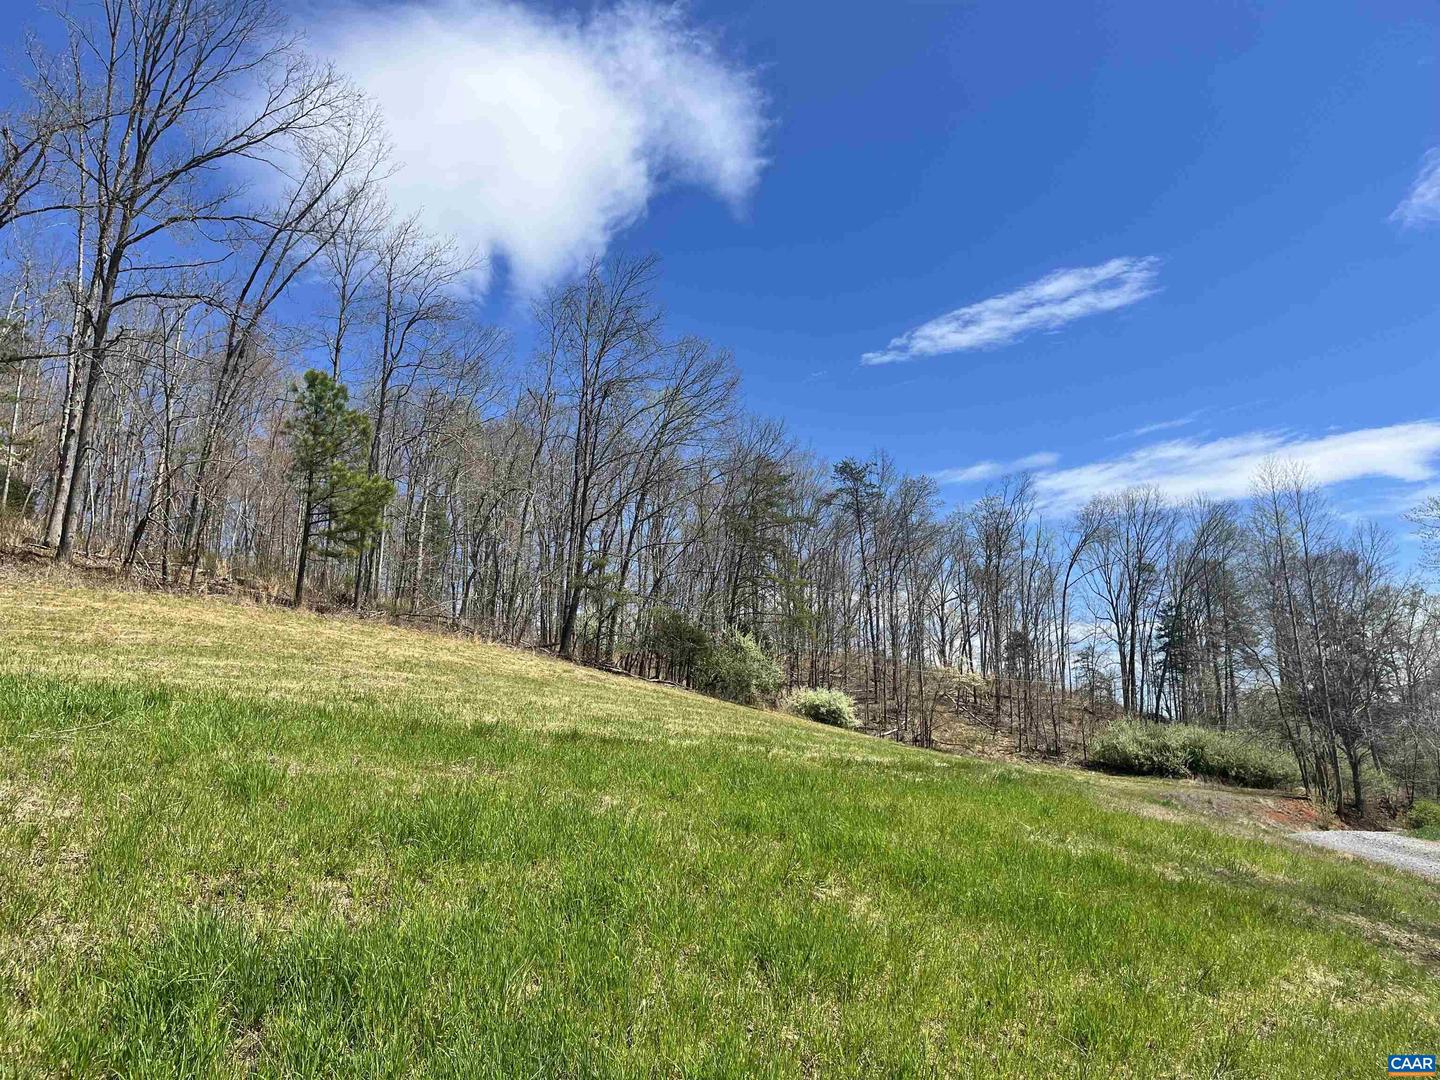 0 WILLOW BRANCH LN #1, FABER, Virginia 22938, ,Land,For sale,0 WILLOW BRANCH LN #1,649235 MLS # 649235